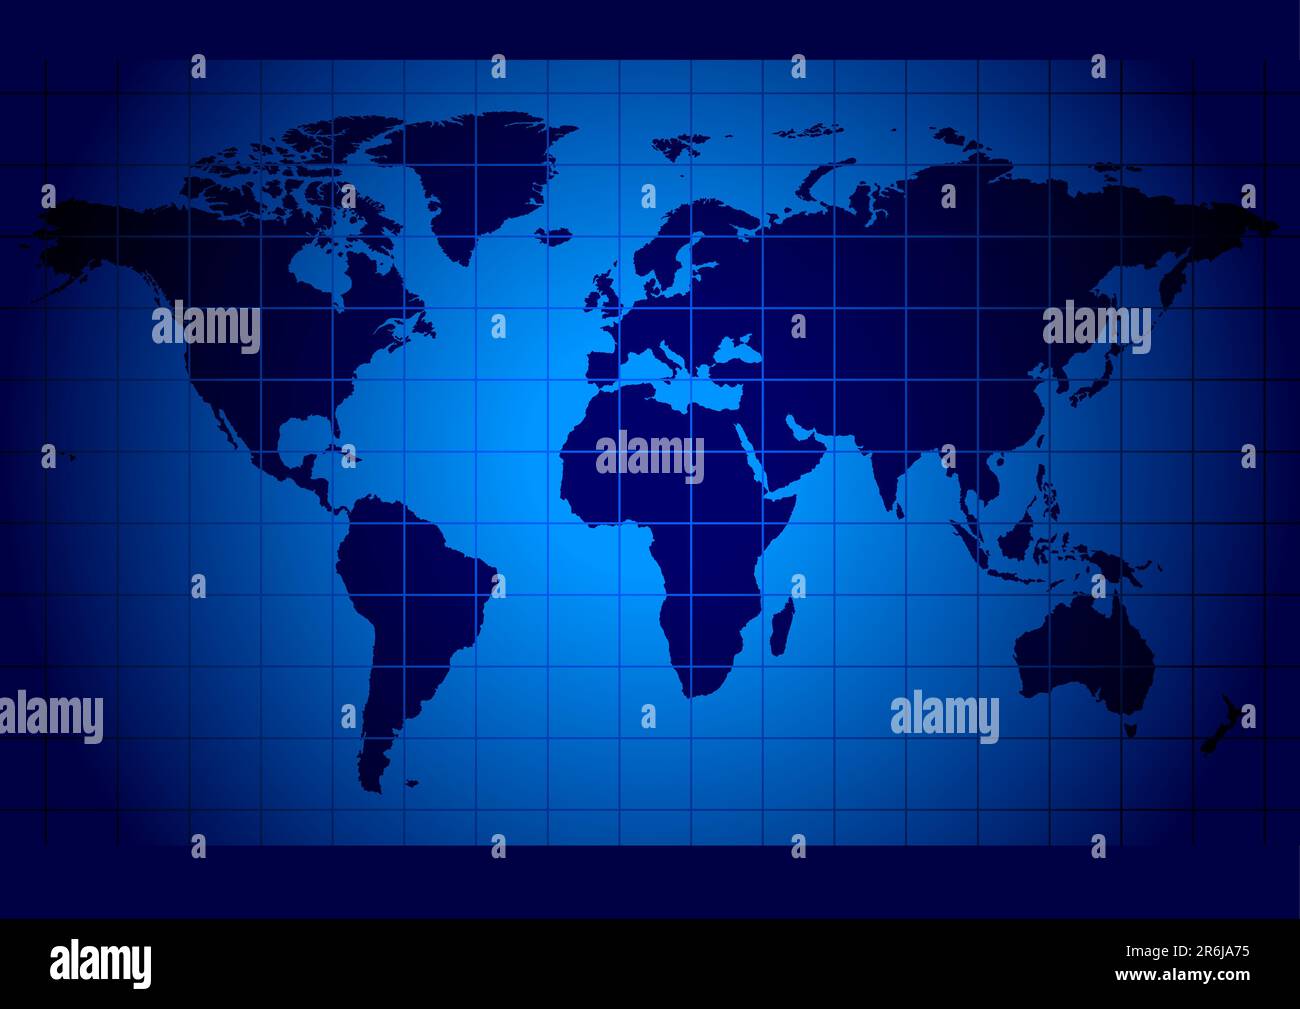 World map blue - highly detailed world map illustration Stock Vector